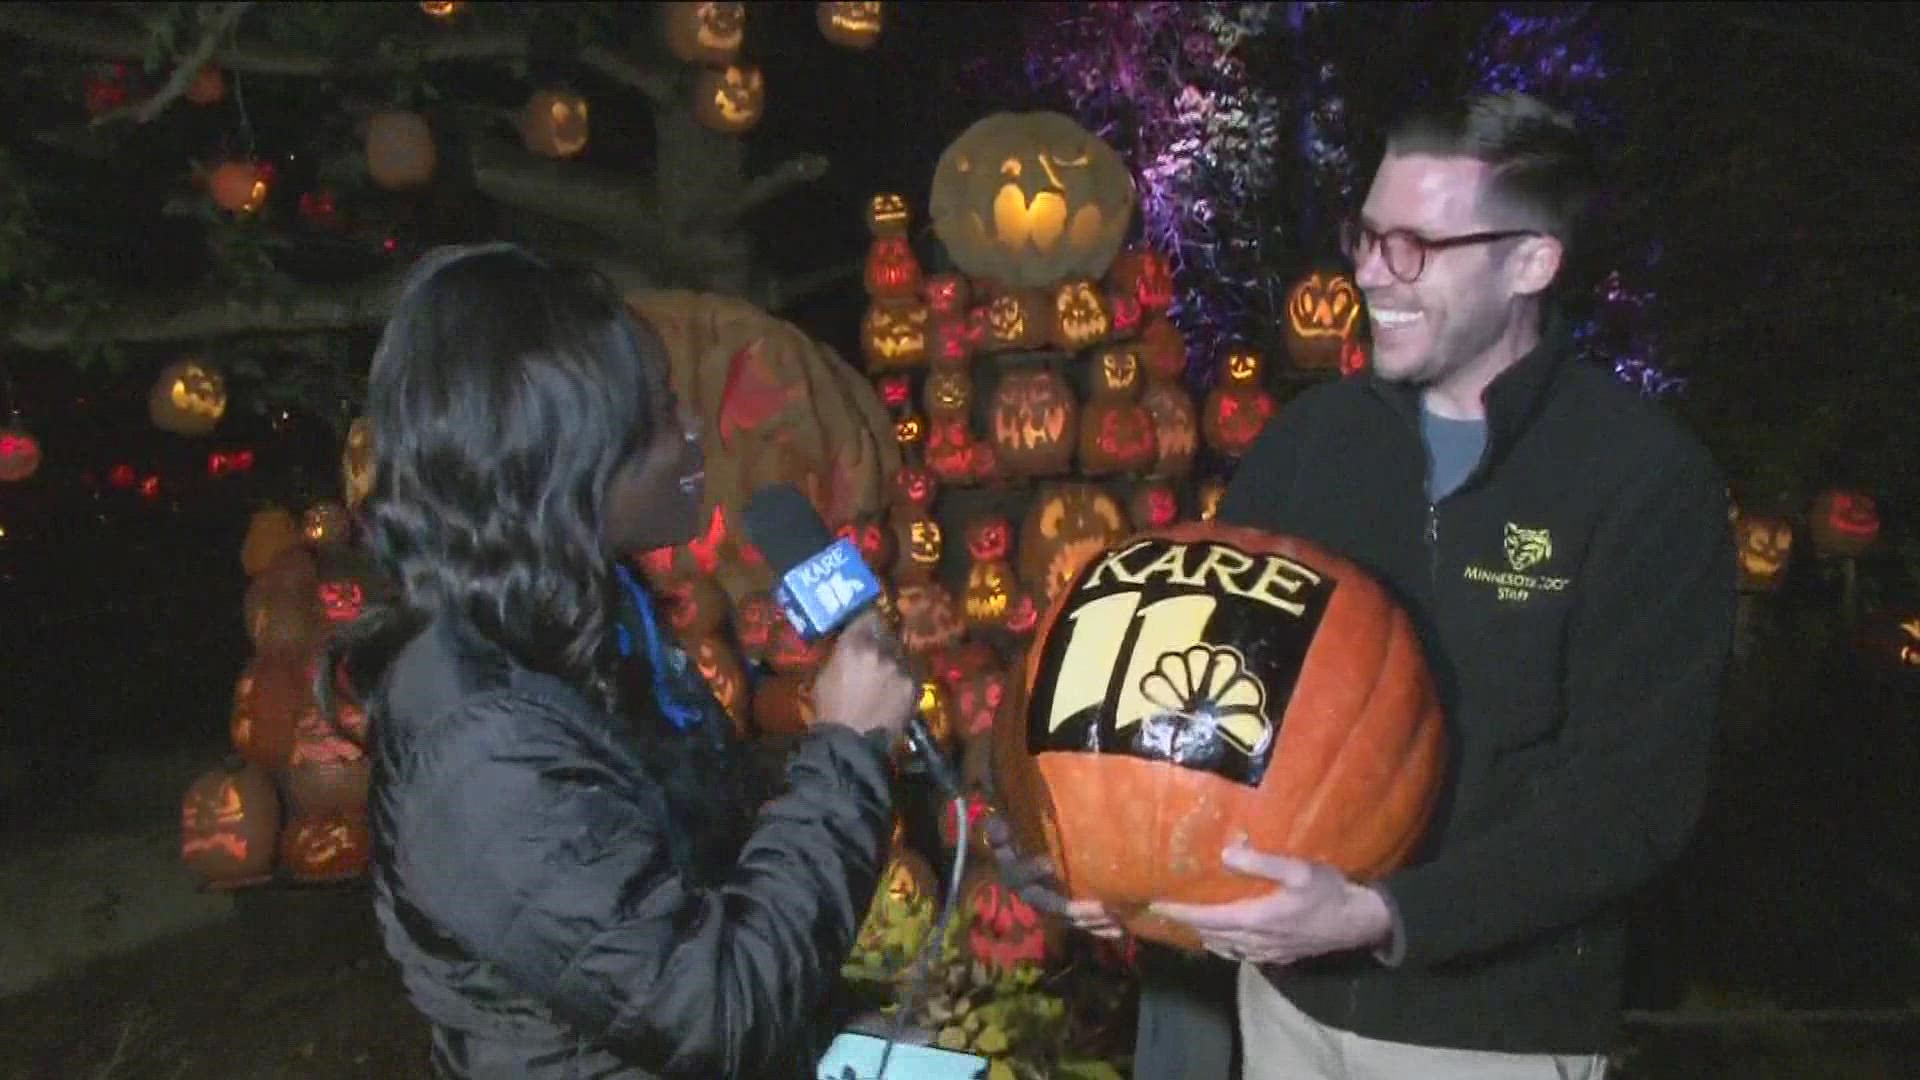 The Jack-O-Lantern Spectacular is happening at the Zoo, nightly through Nov. 5.